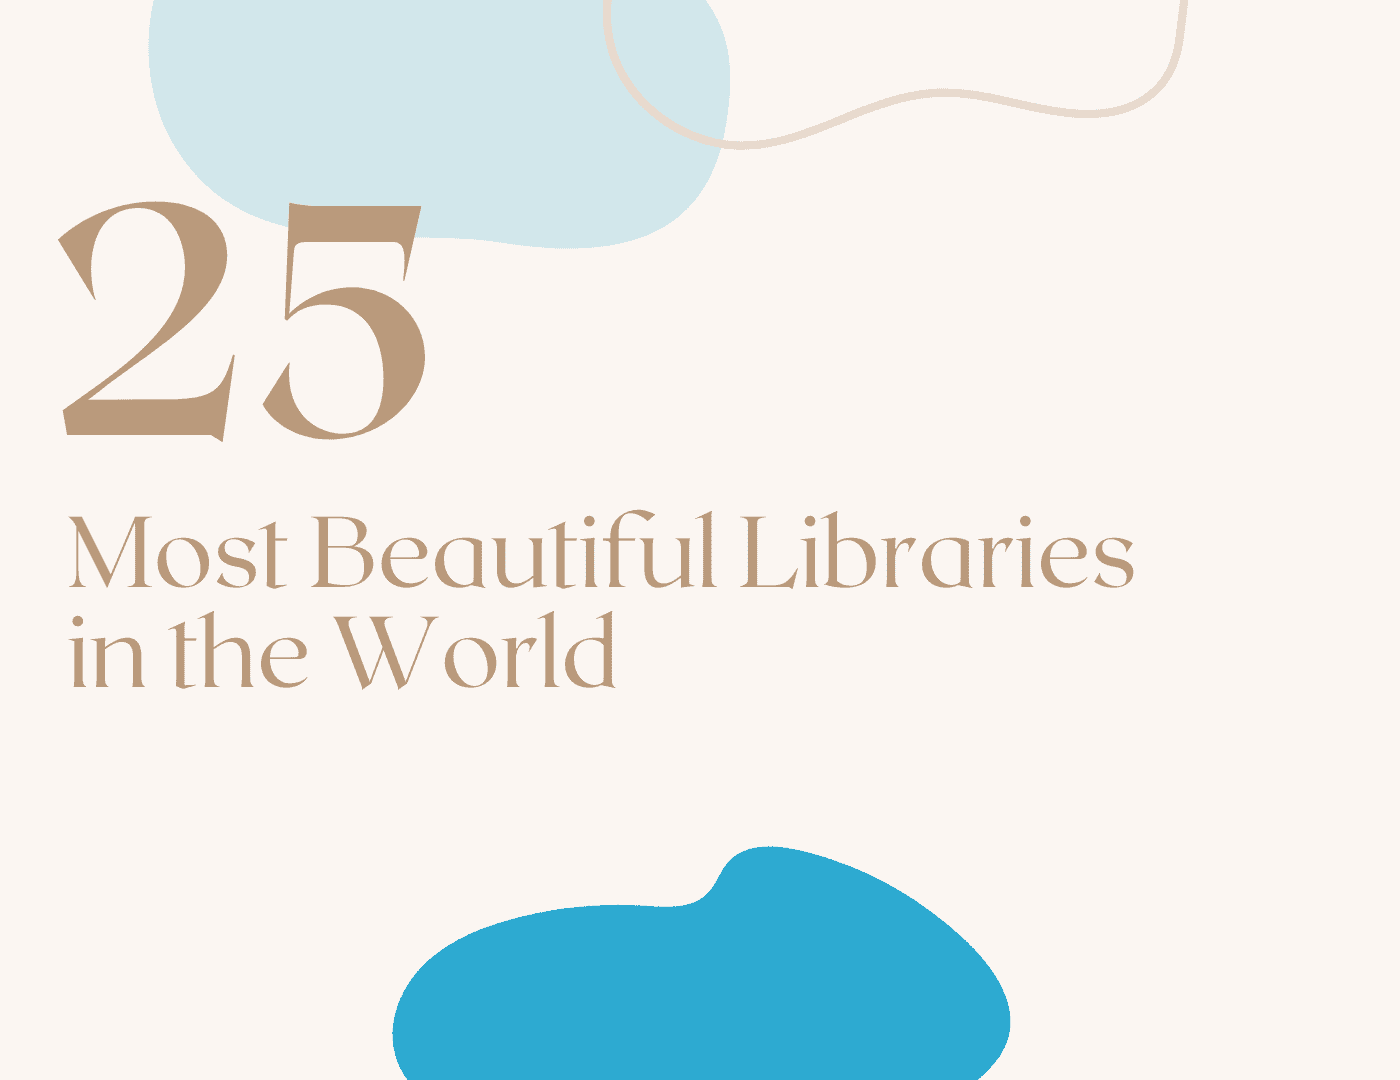 The 25 Most Beautiful Libraries in the World